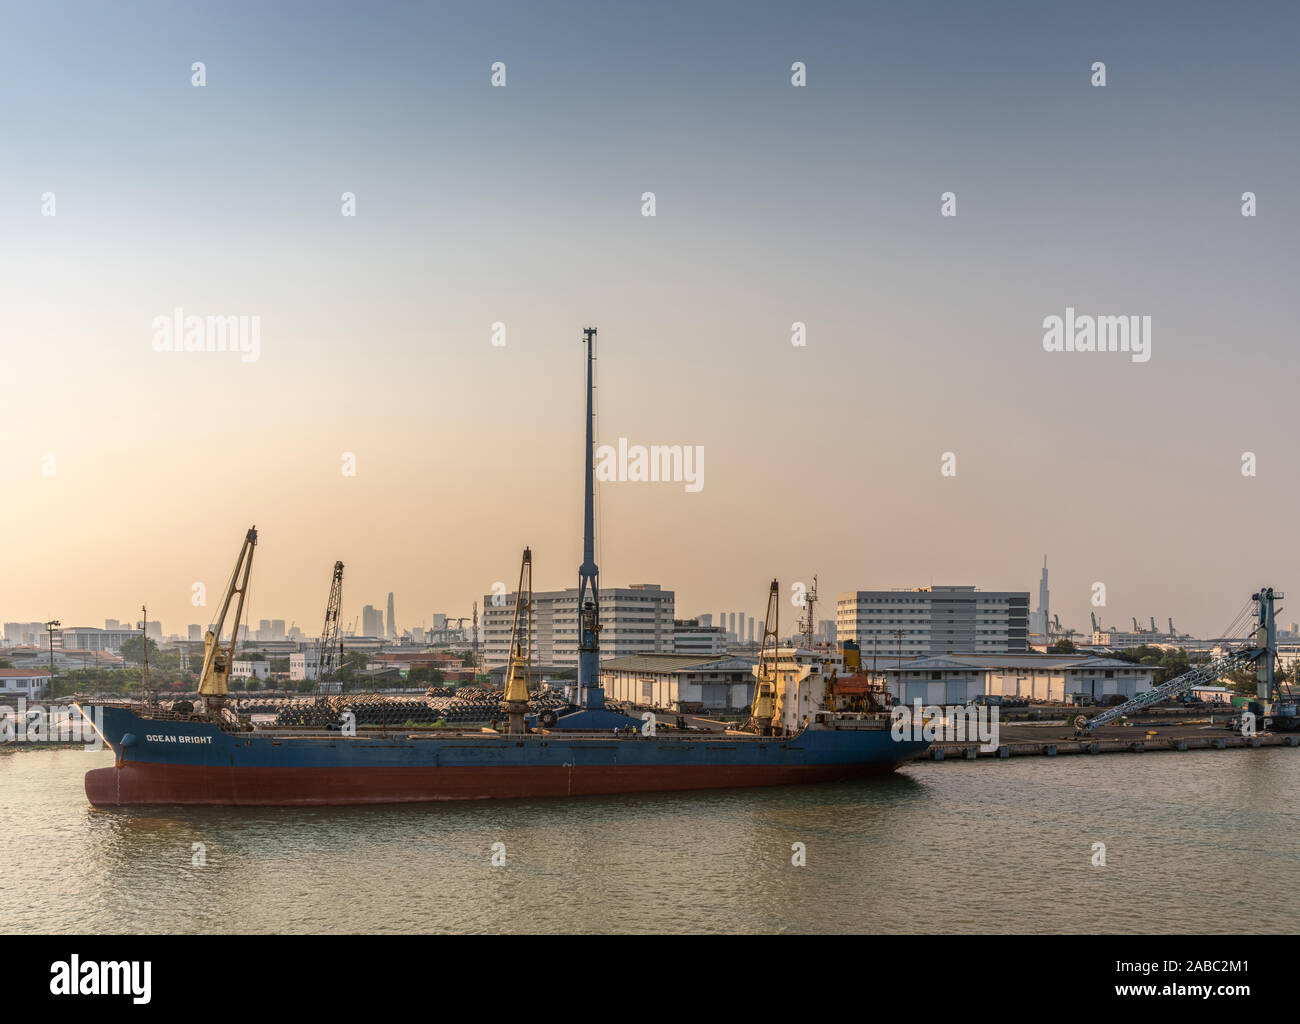 Ho Chi Minh City, Vietnam - March 13, 2019: Song Sai Gon river at sunset. Blue-red Ocean Bright sea cargo vessel docked and worked on by tall blue cra Stock Photo